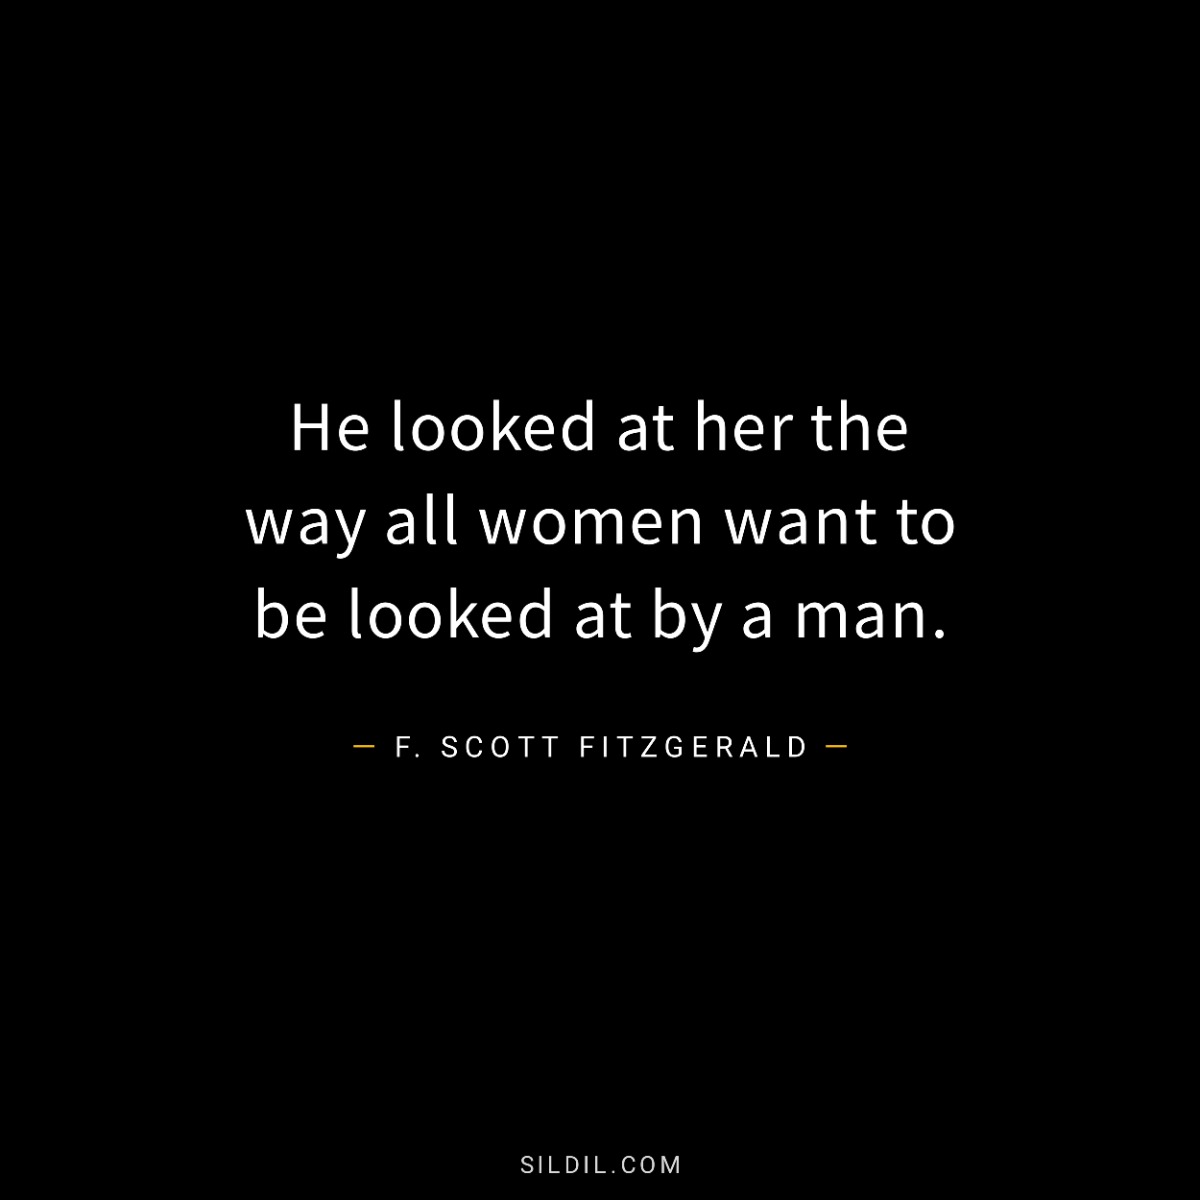 He looked at her the way all women want to be looked at by a man.